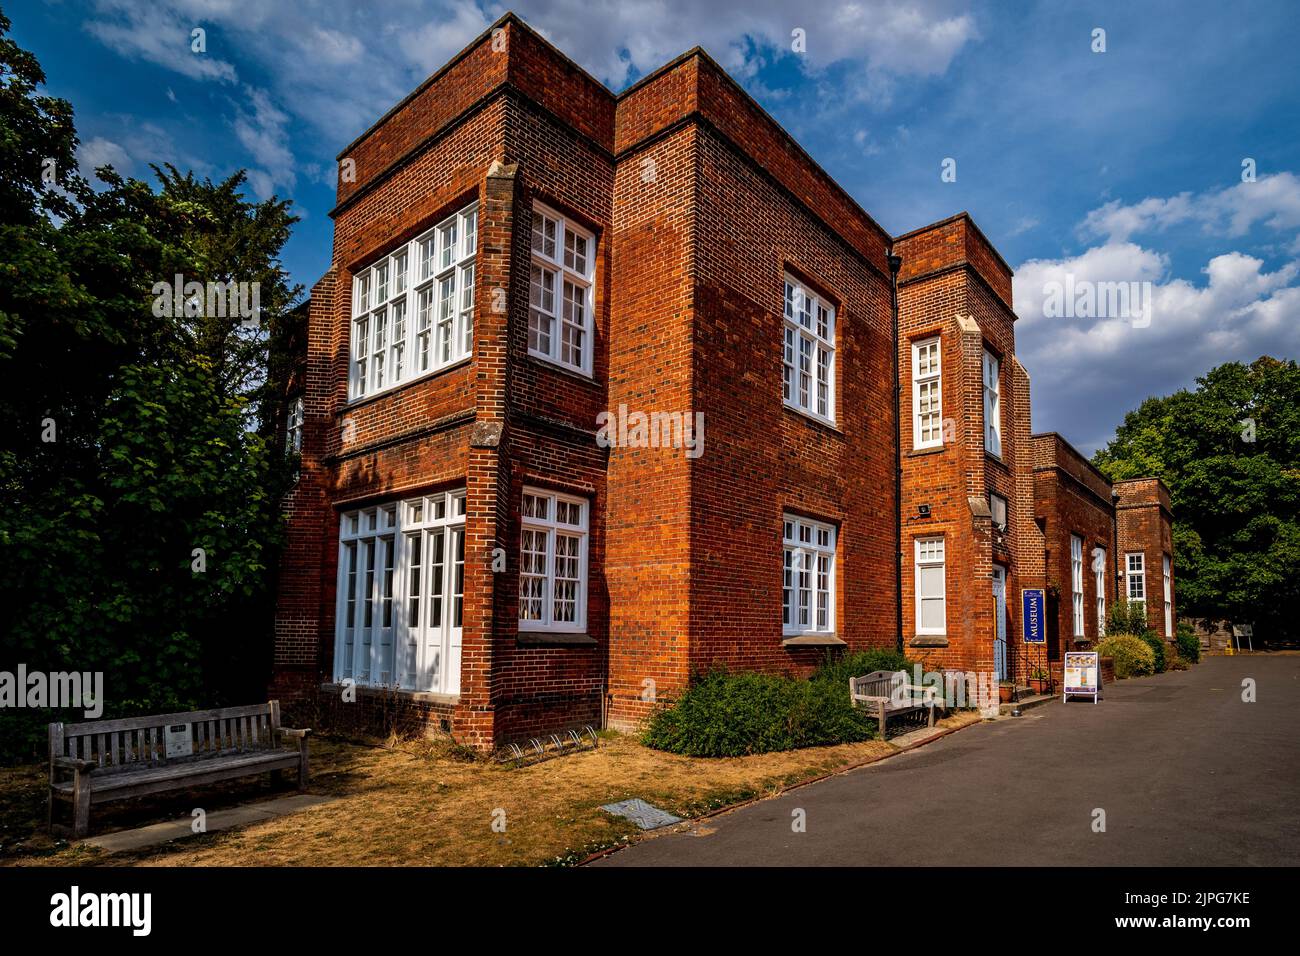 Saffron Walden Museum in Museum Street, Saffron Walden, North Essex, Thought to be one of the oldest purpose built museums in the UK, founded in 1835. Stock Photo